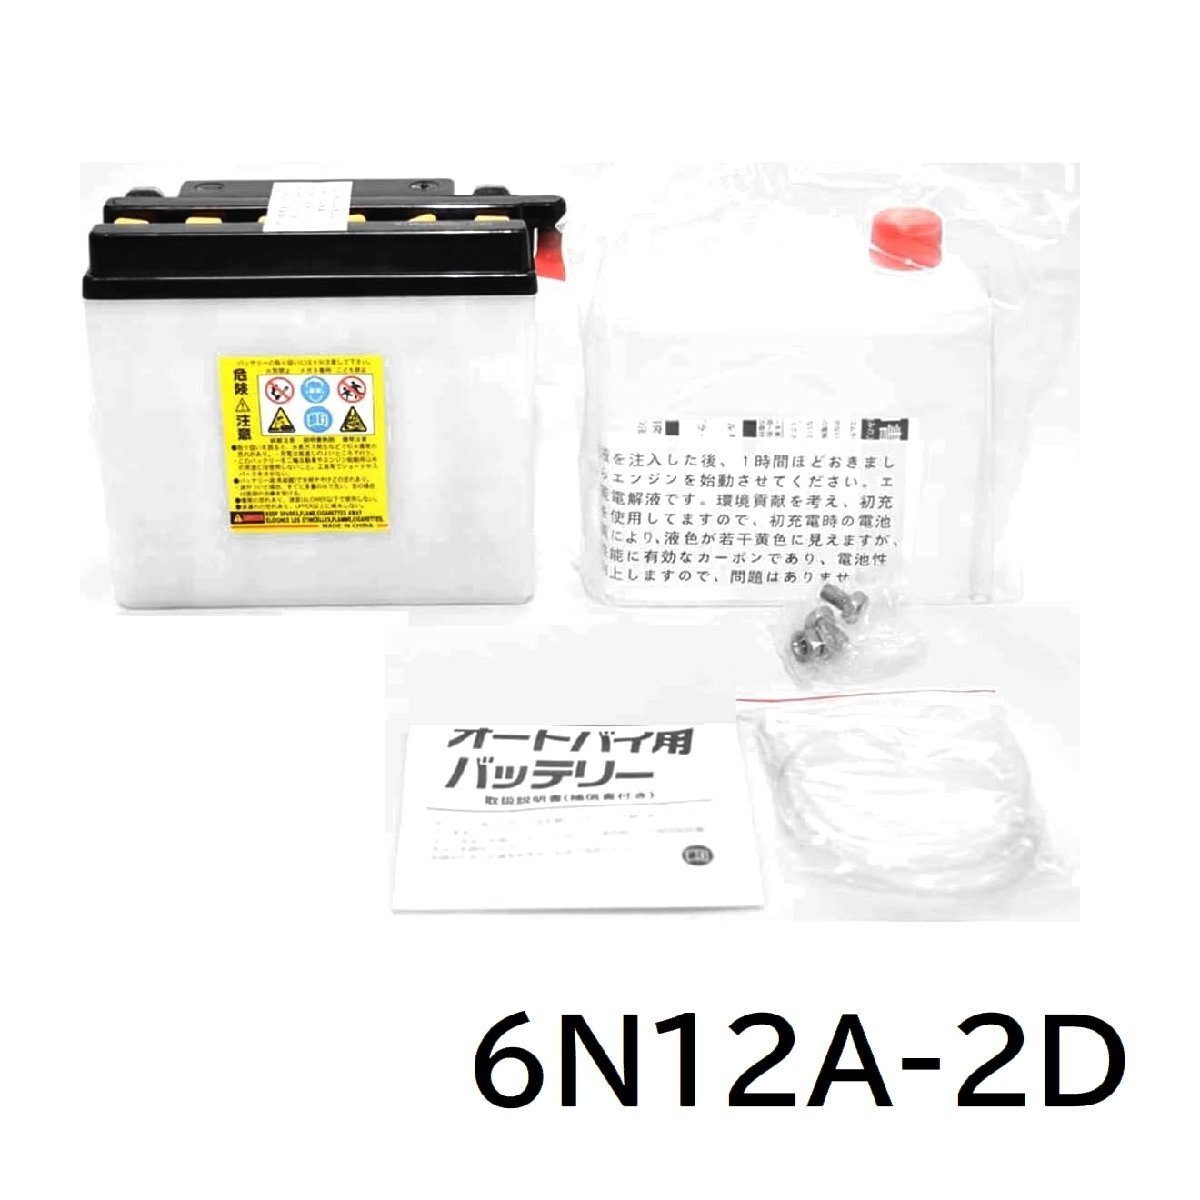 * new goods * stock equipped * for motorcycle battery 2 wheel for interchangeable battery Honda CD125T CM125T motorcycle supplies 6N12A-2D